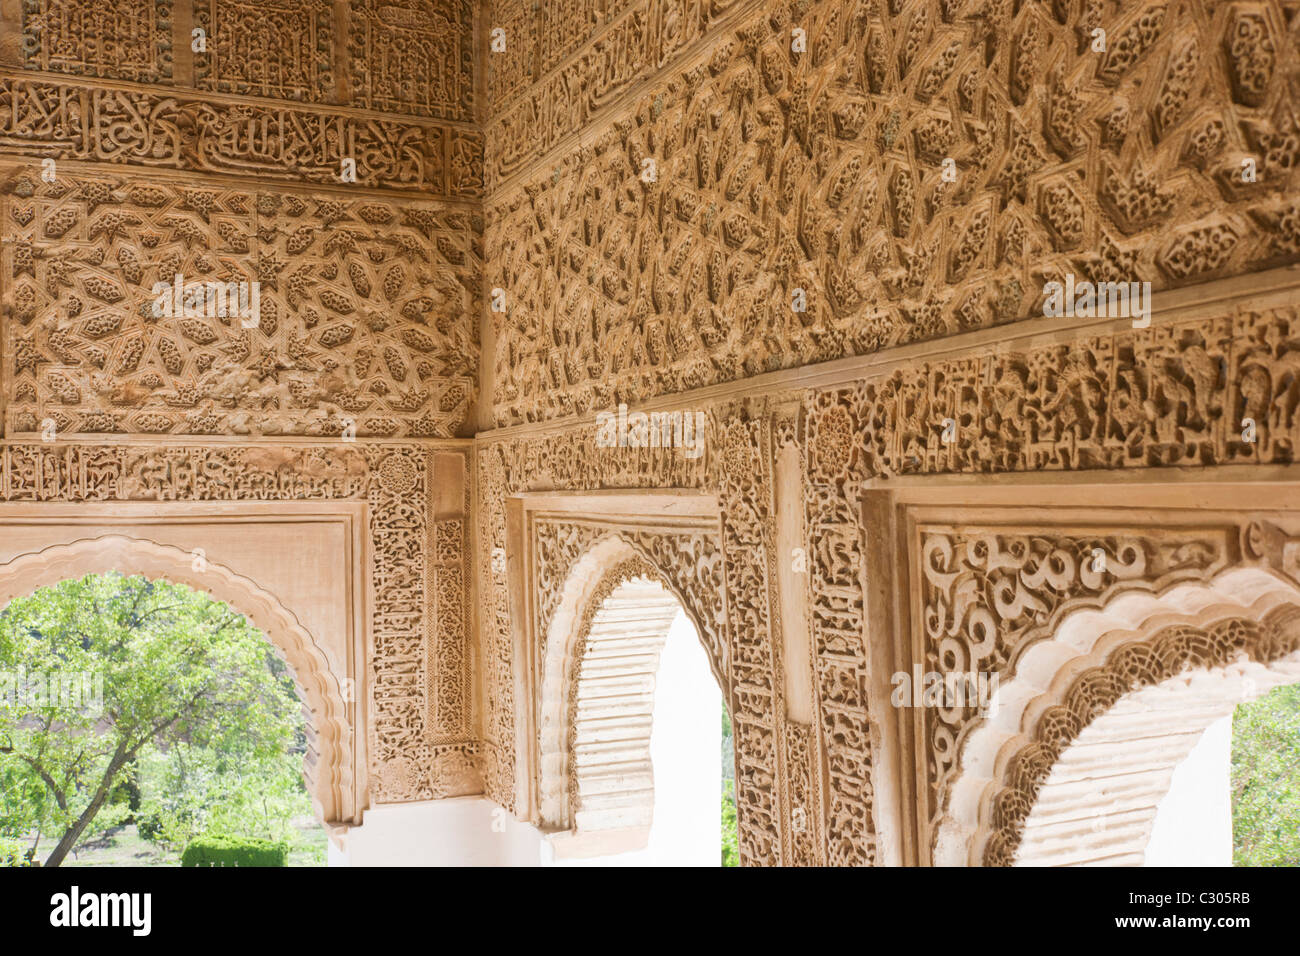 Ornate carving and architecture after conservation work in Court of the Sultana, Alhambra, Granada. Stock Photo